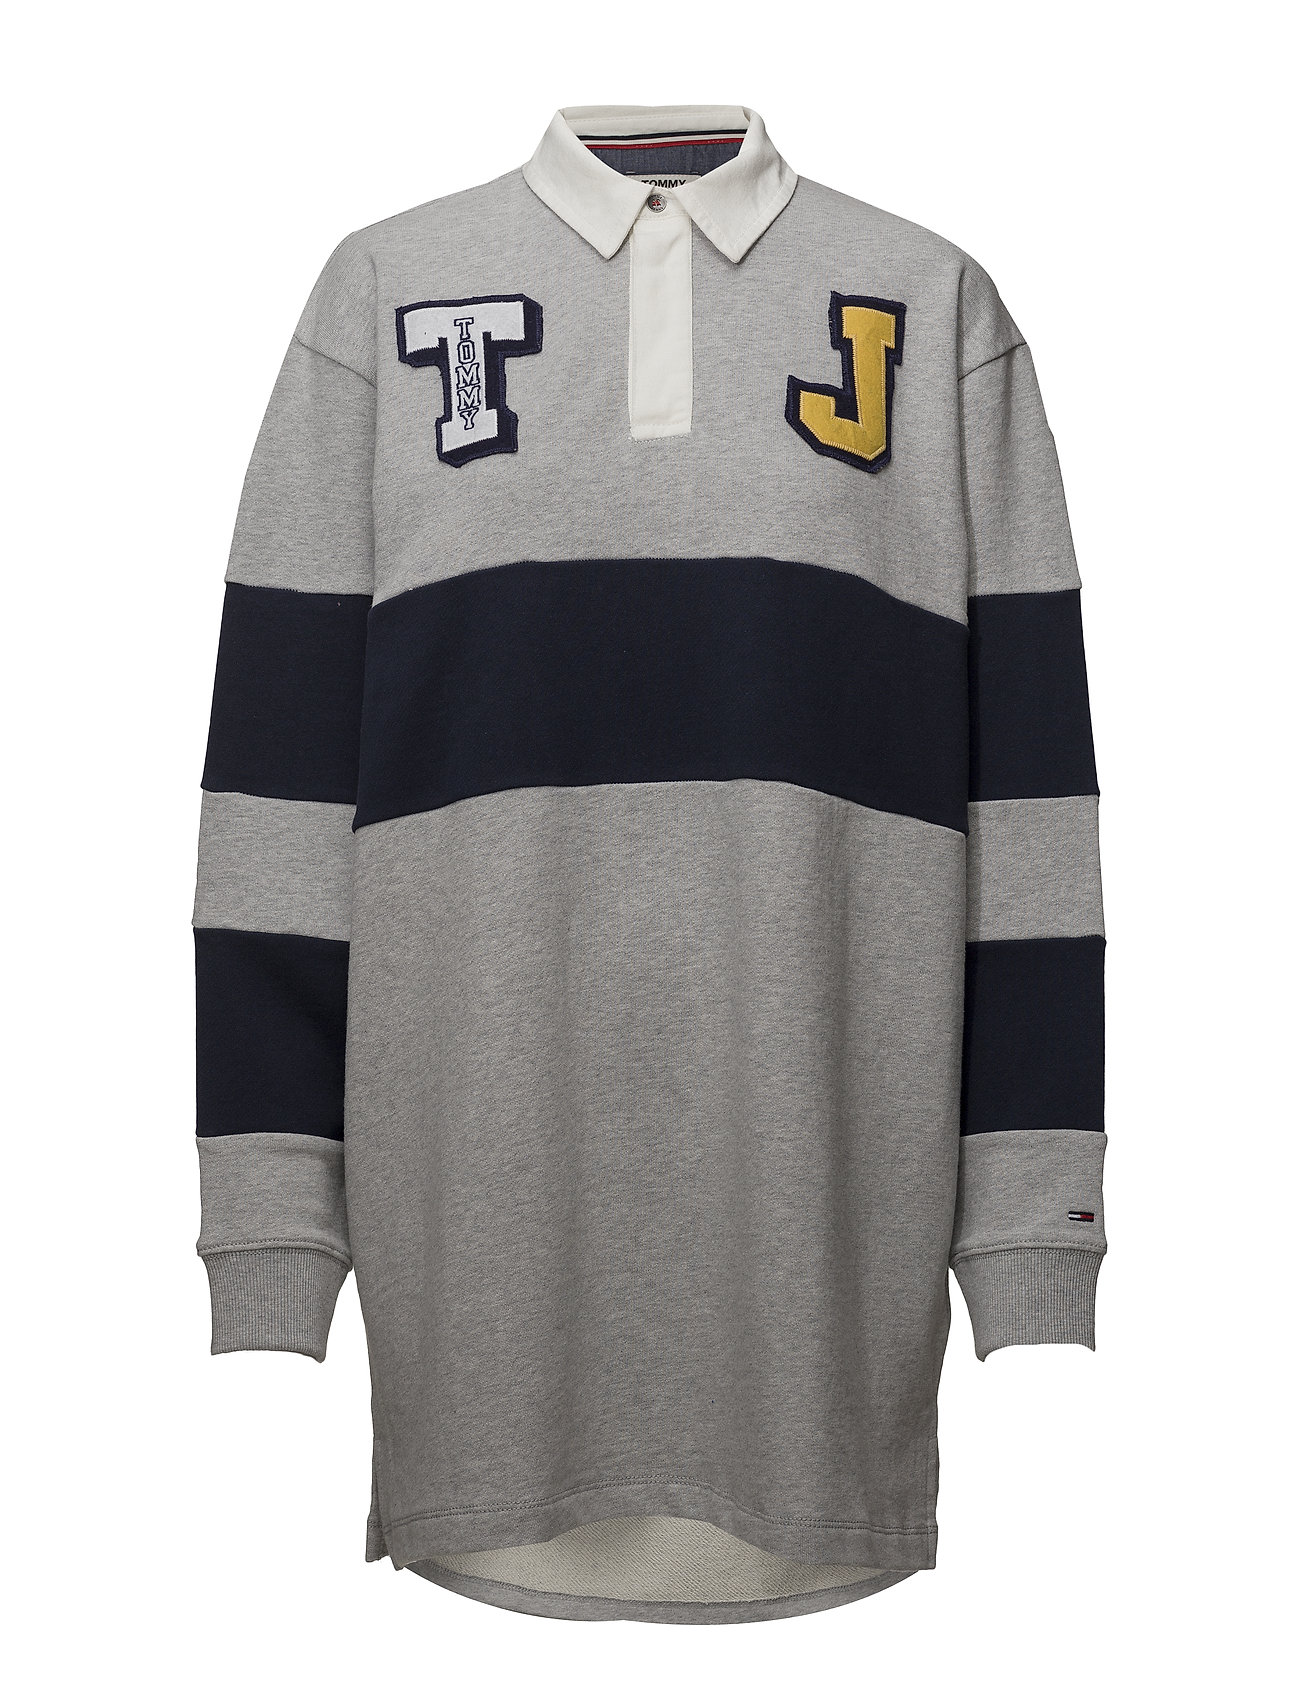 tommy jeans rugby dress